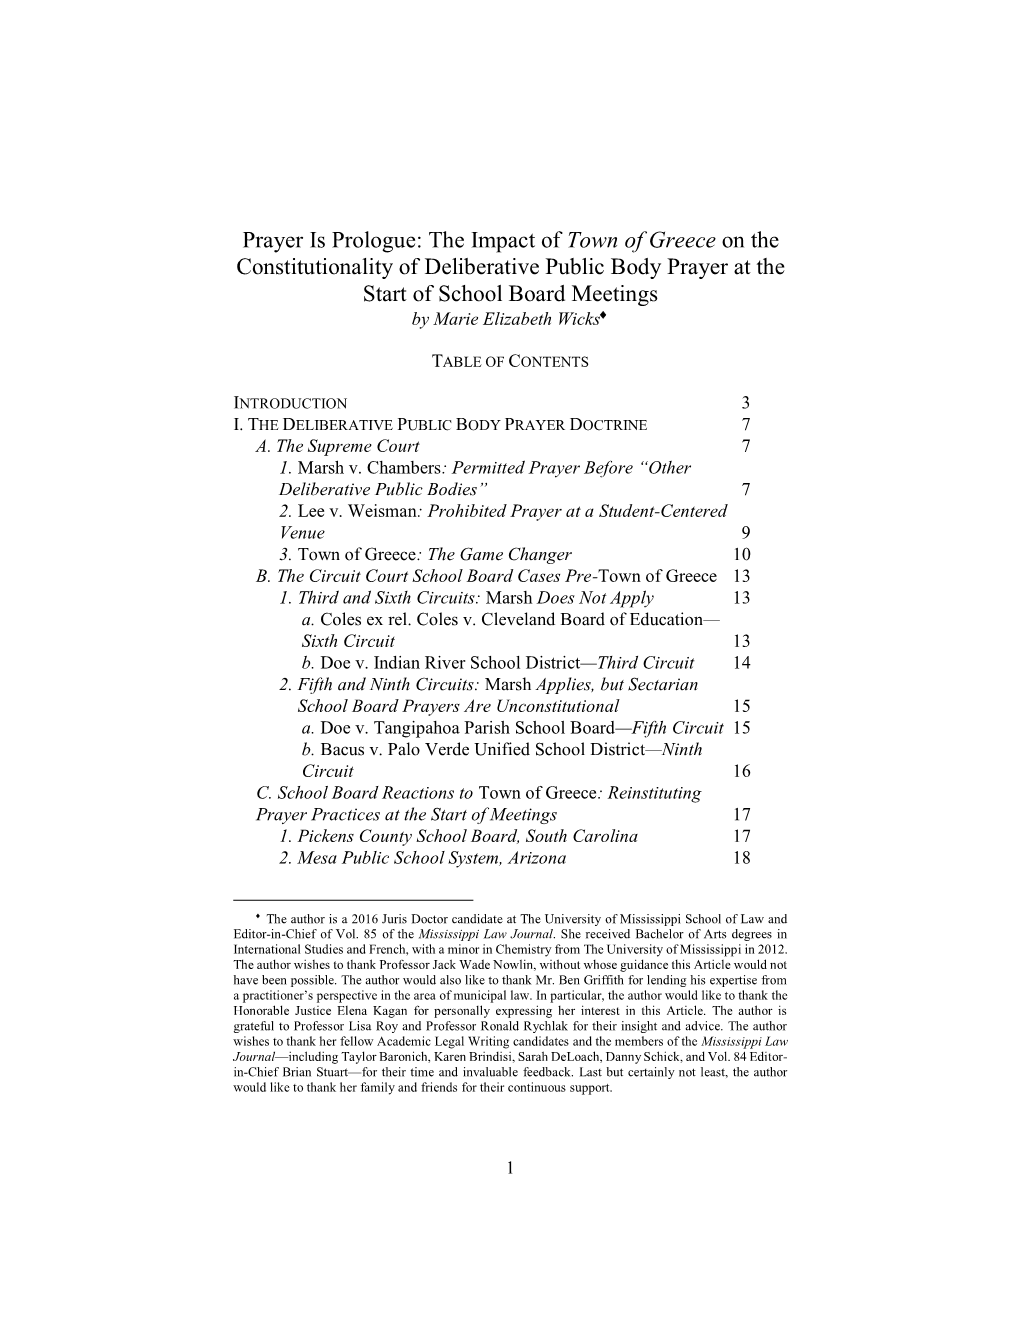 Prayer Is Prologue: the Impact of Town of Greece on the Constitutionality of Deliberative Public Body Prayer at the Start Of